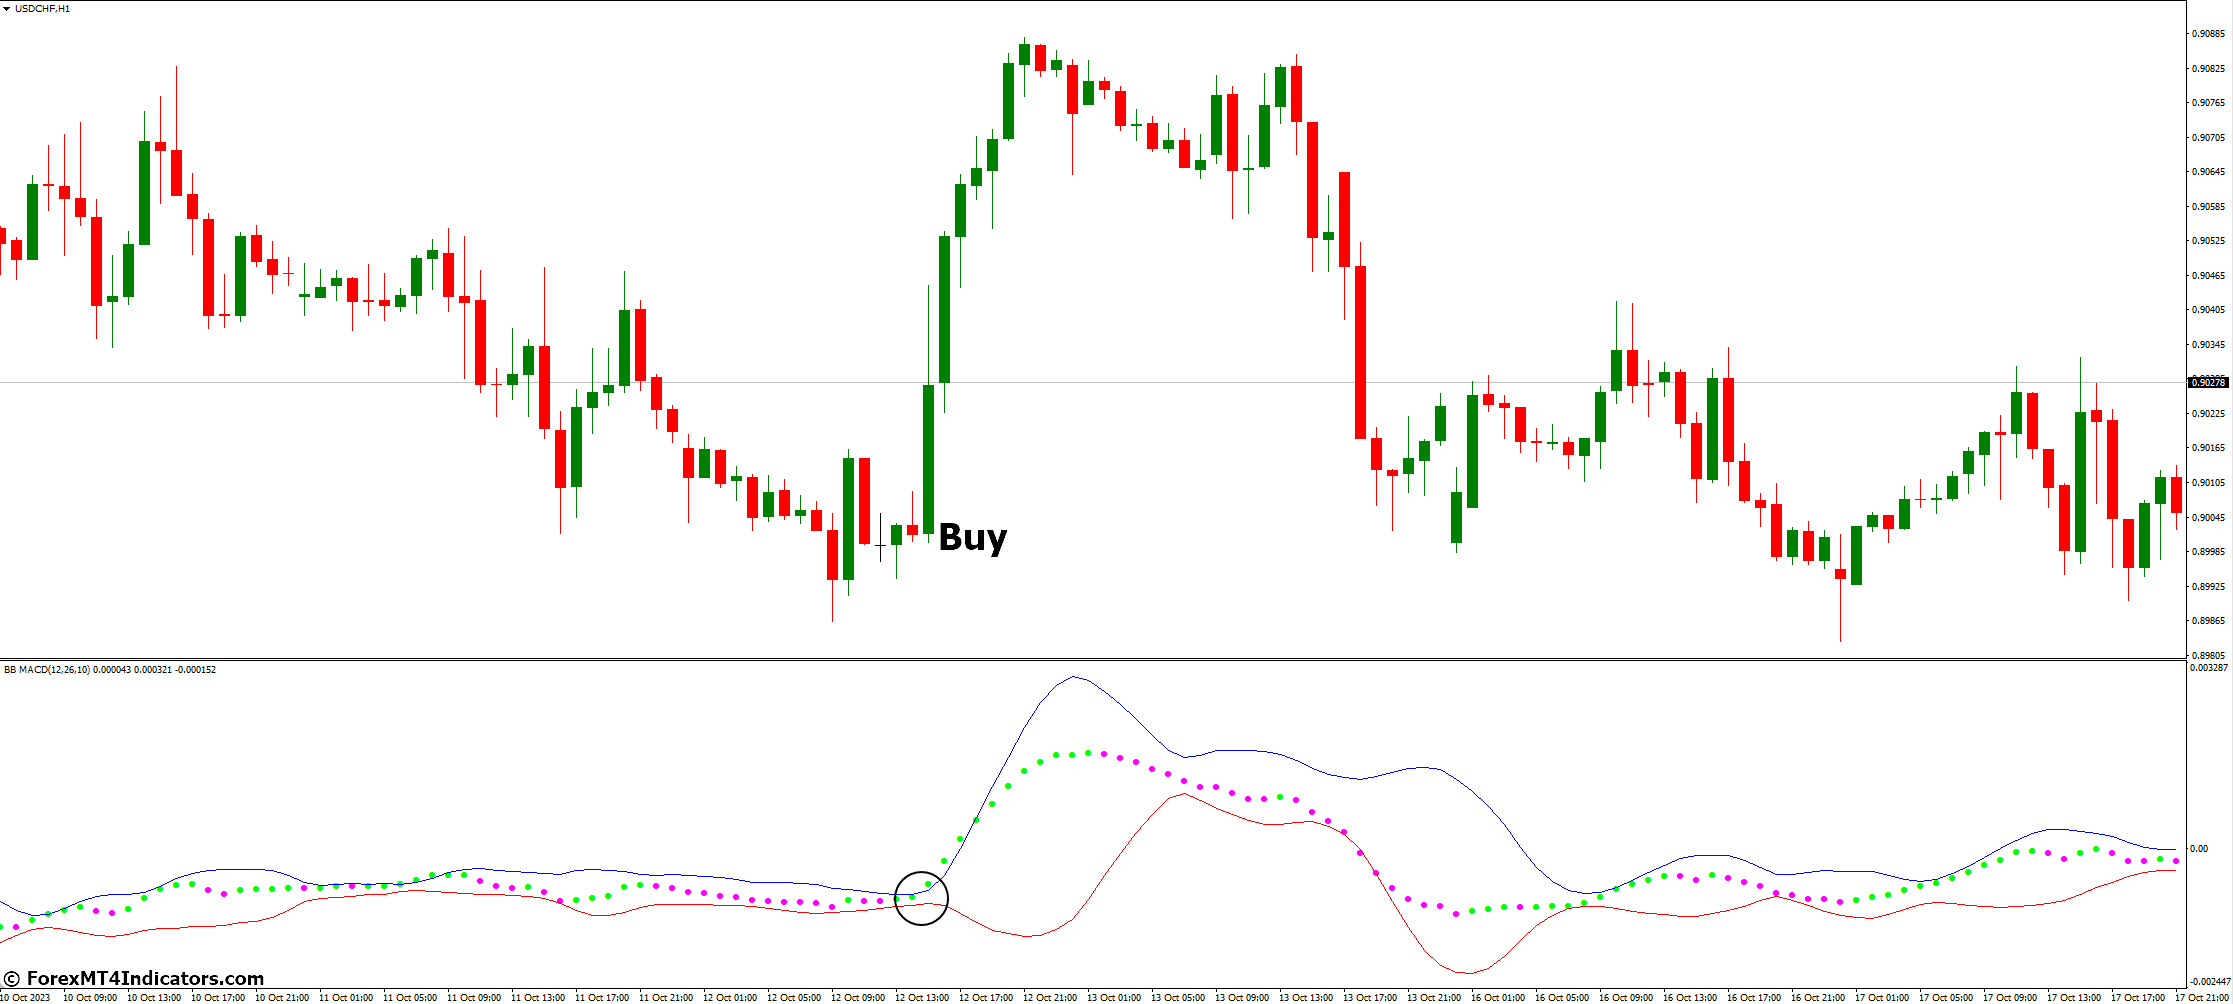 How to Trade with BB MACD MT4 Indicator - Buy Entry